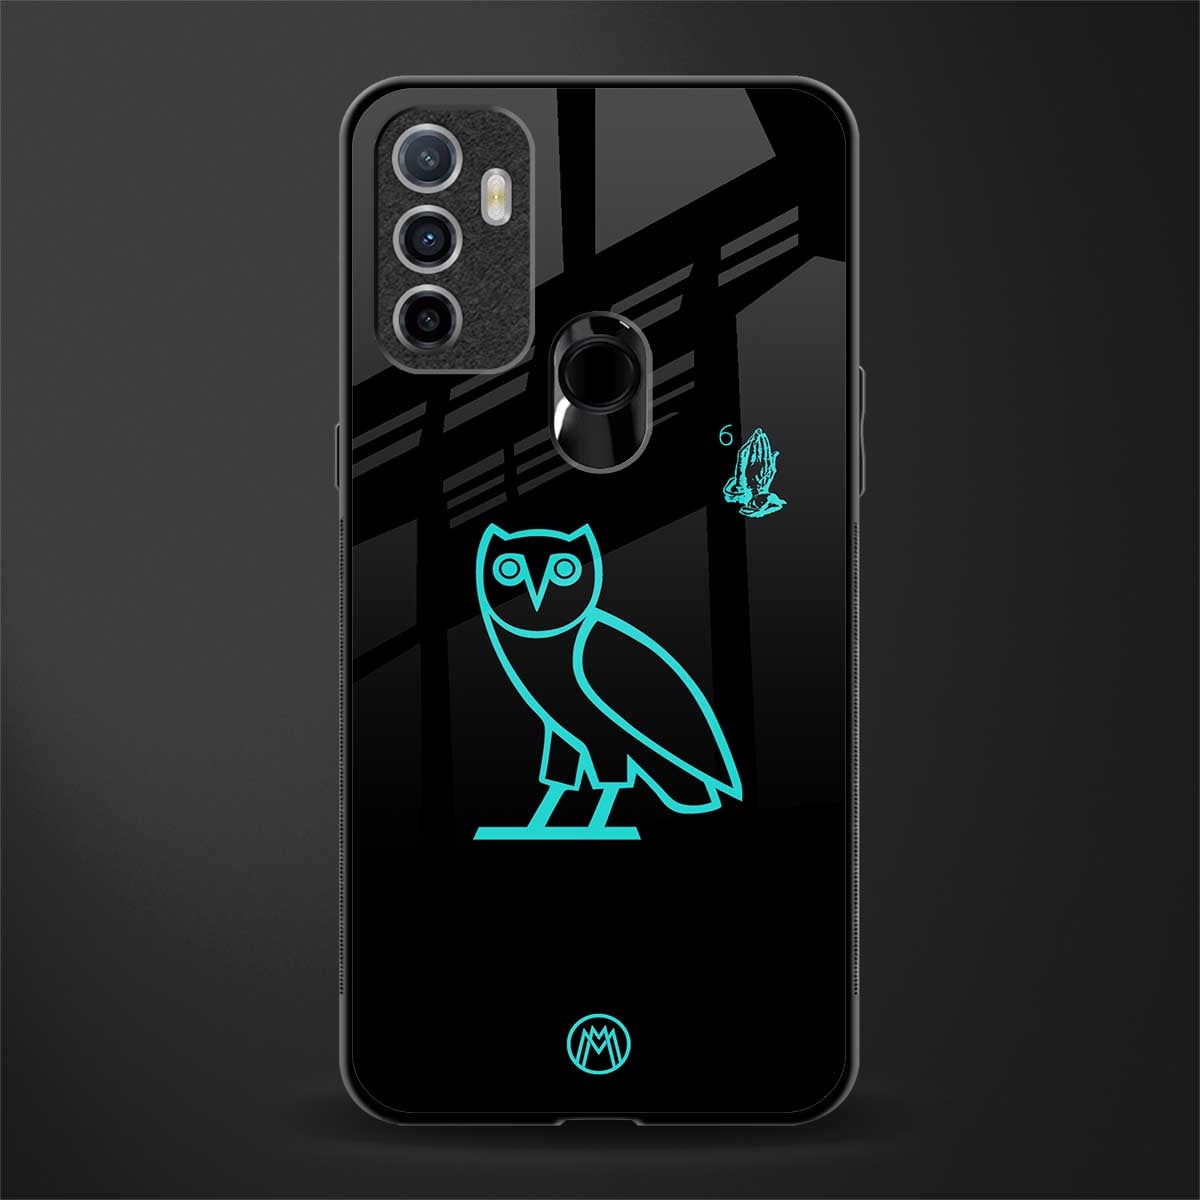 ovo glass case for oppo a53 image